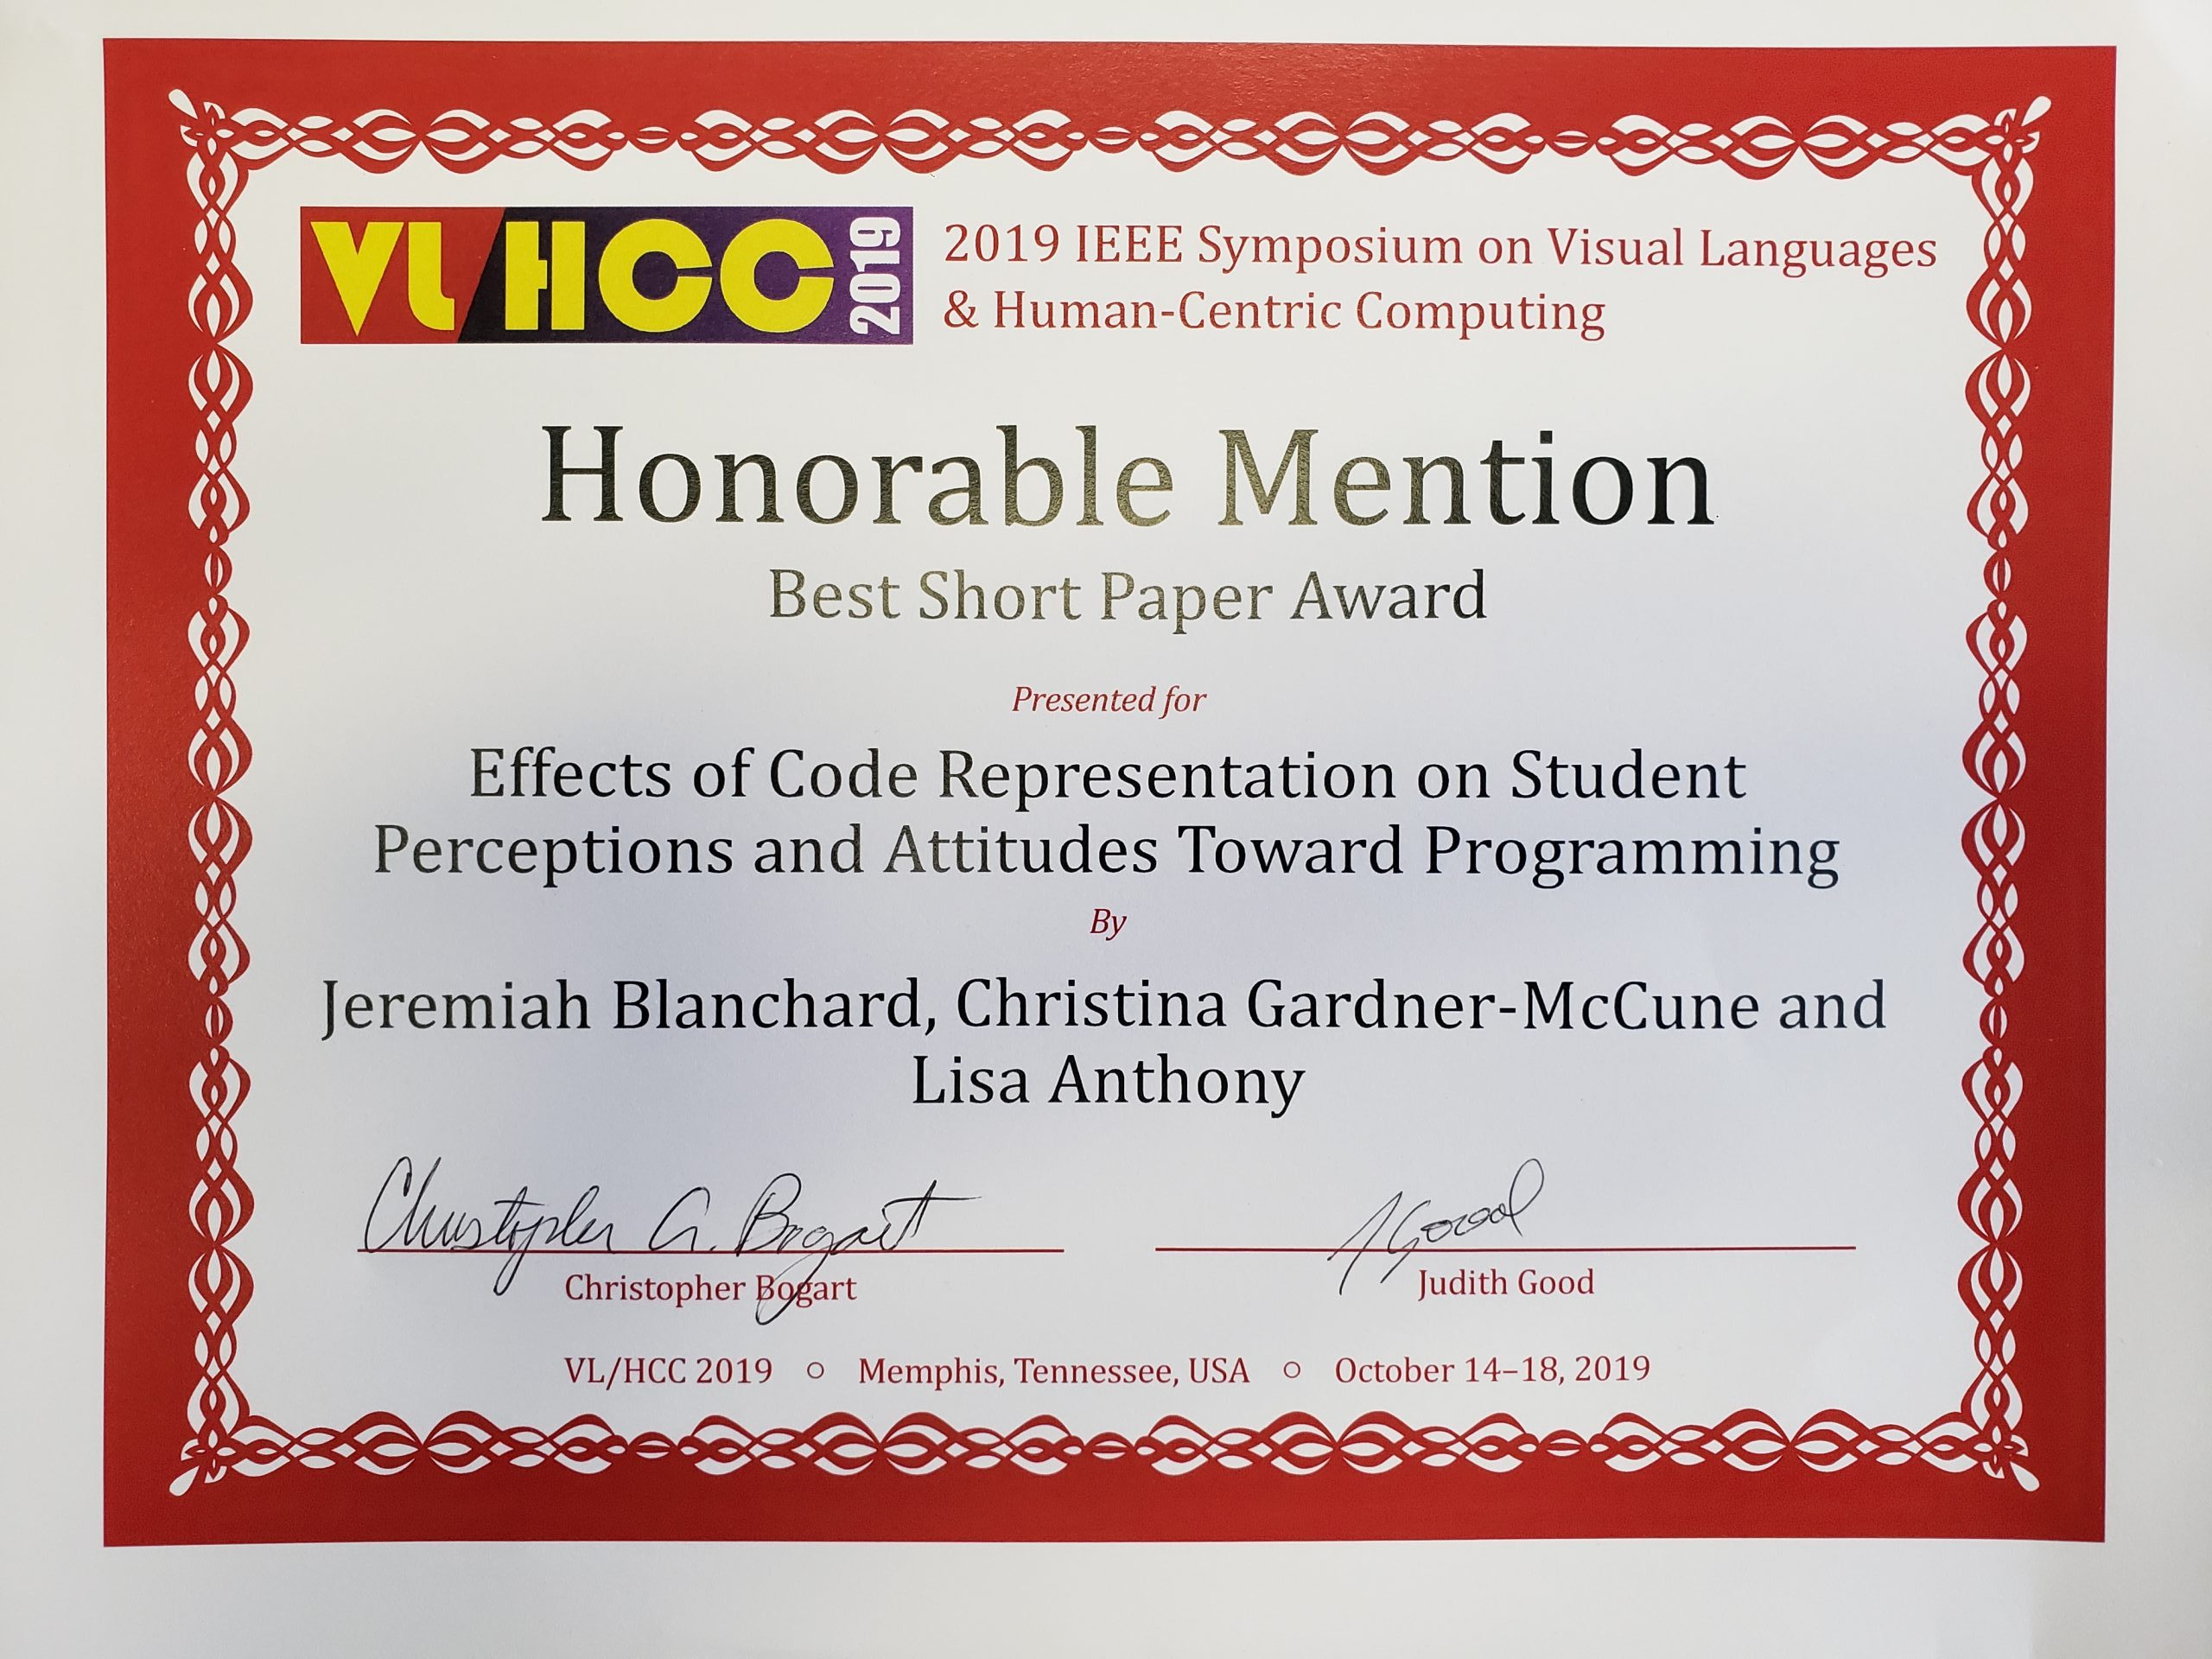 image of certificate for Honorable Mention for Best Short Paper at VL/HCC 2019